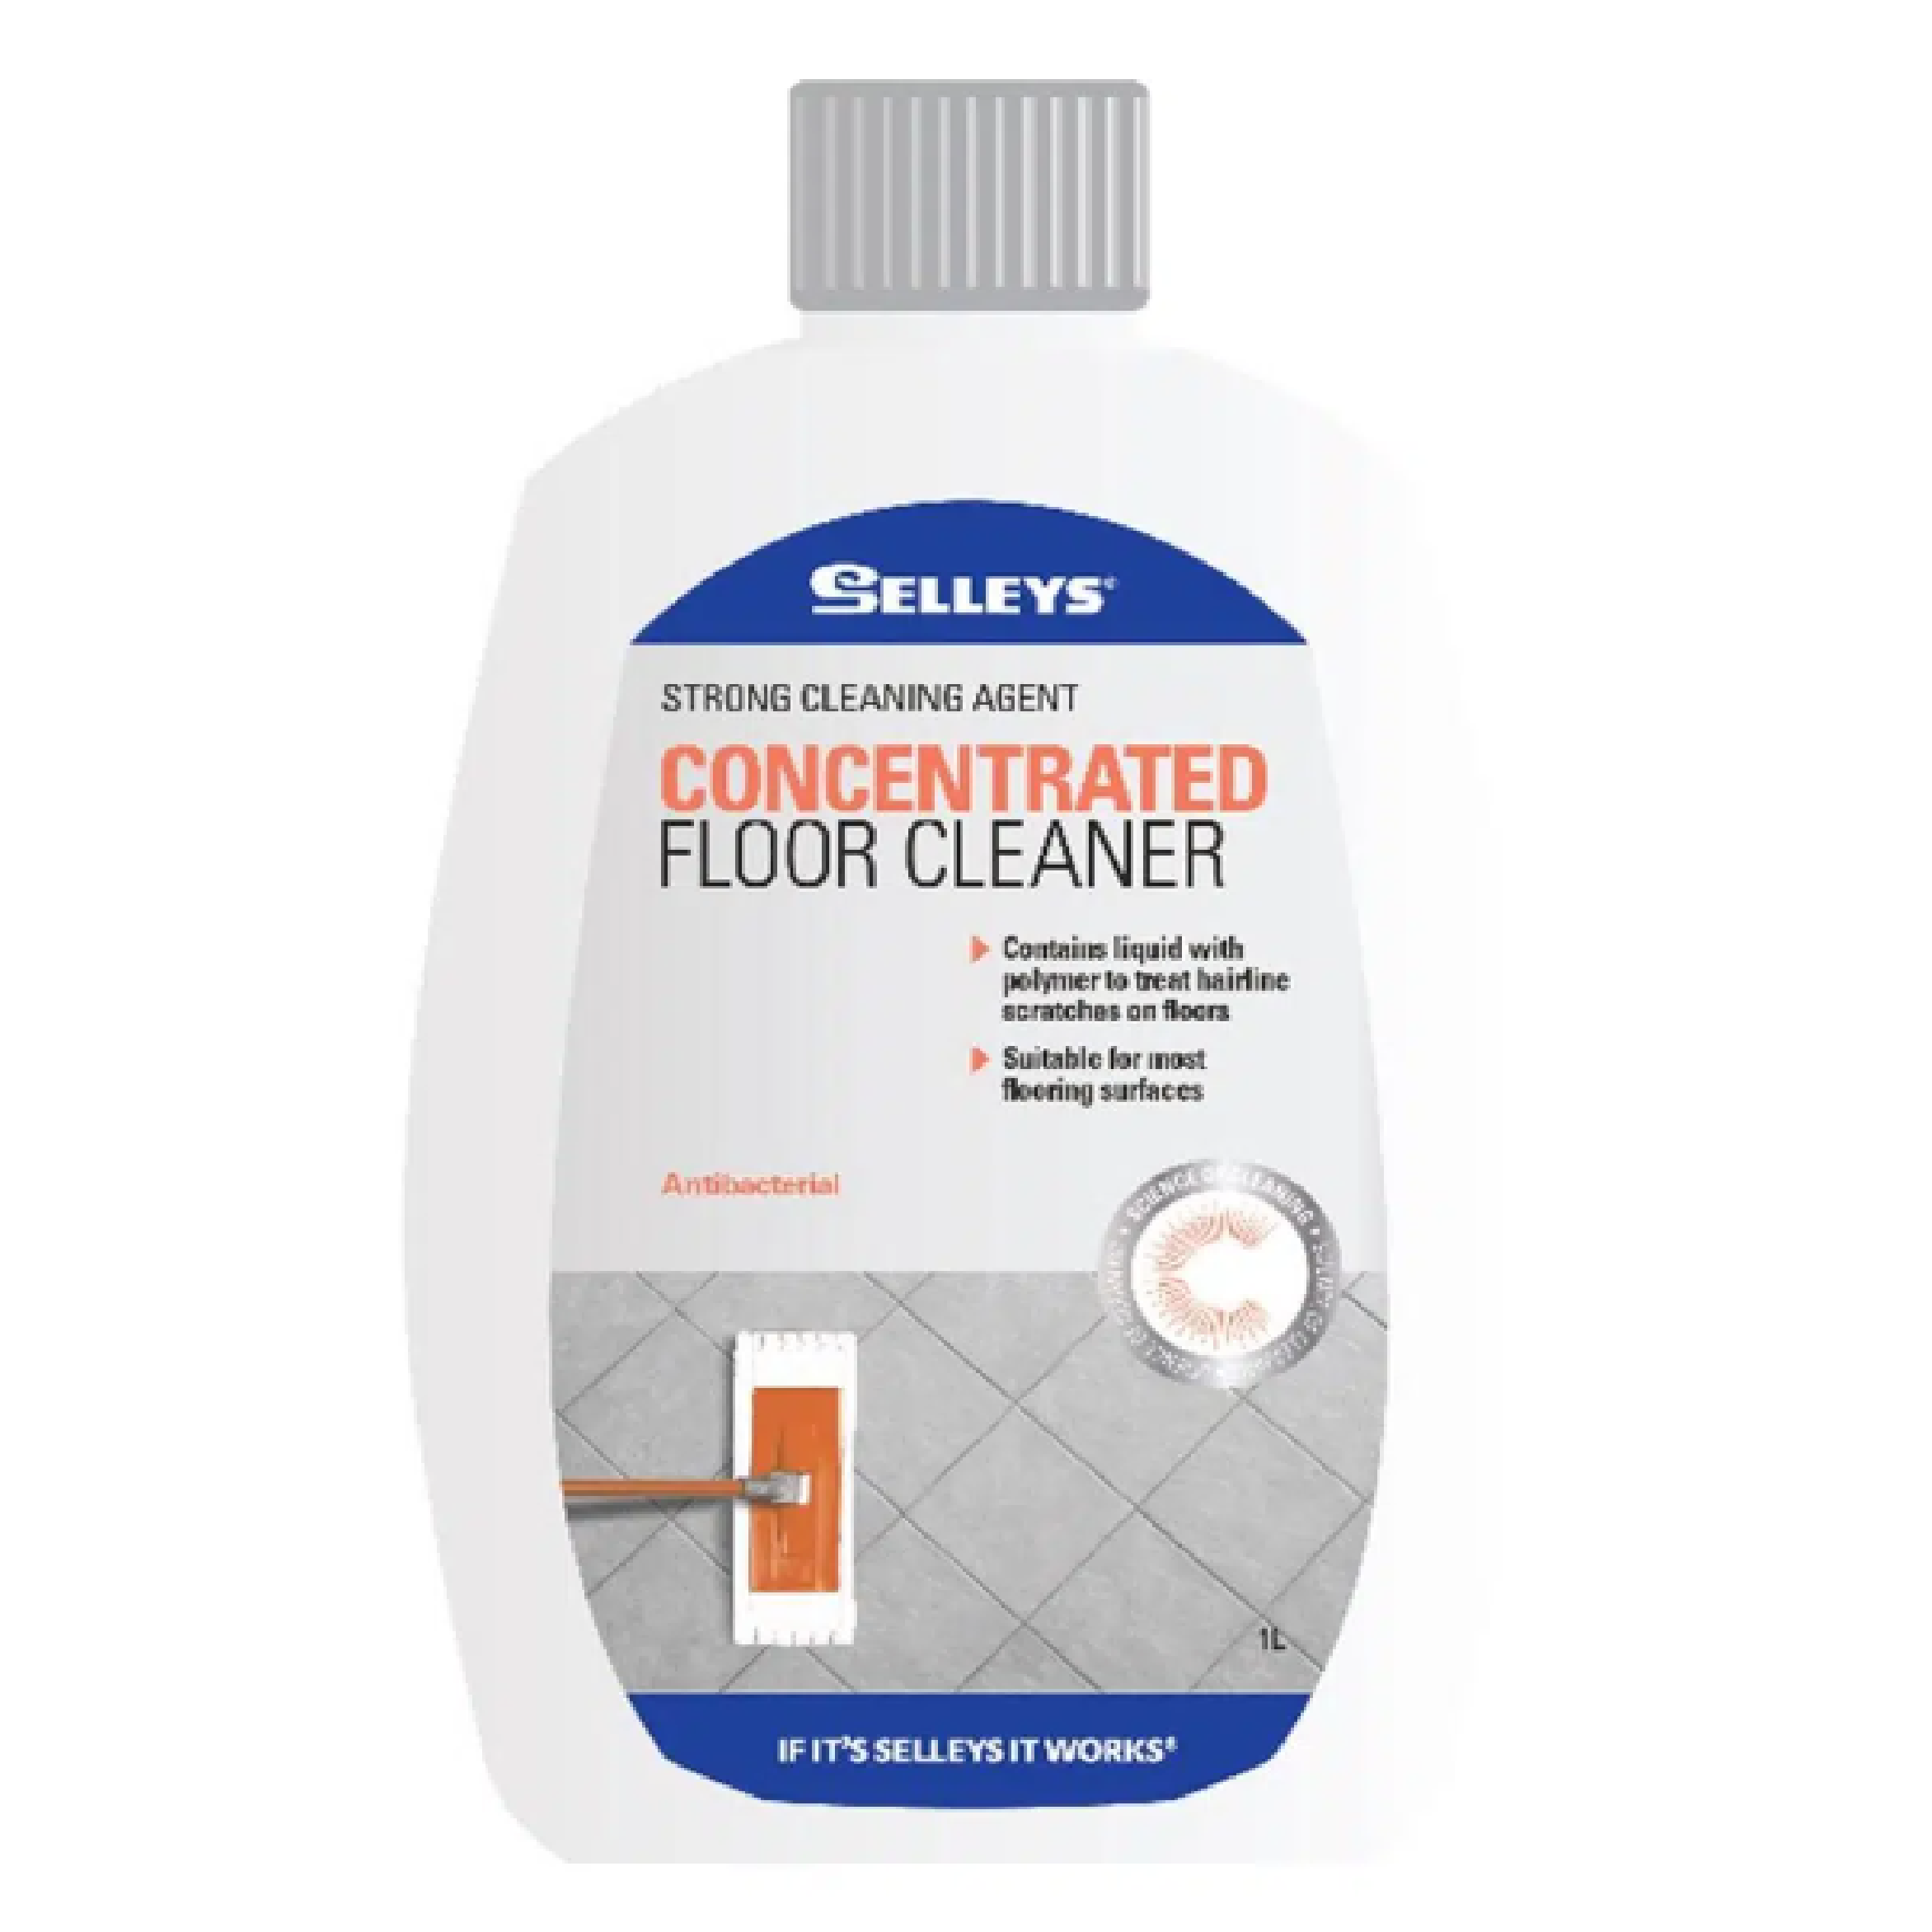 Selleys CONCENTRATED Floor Cleaner 1L ANTI-BACTERIAL